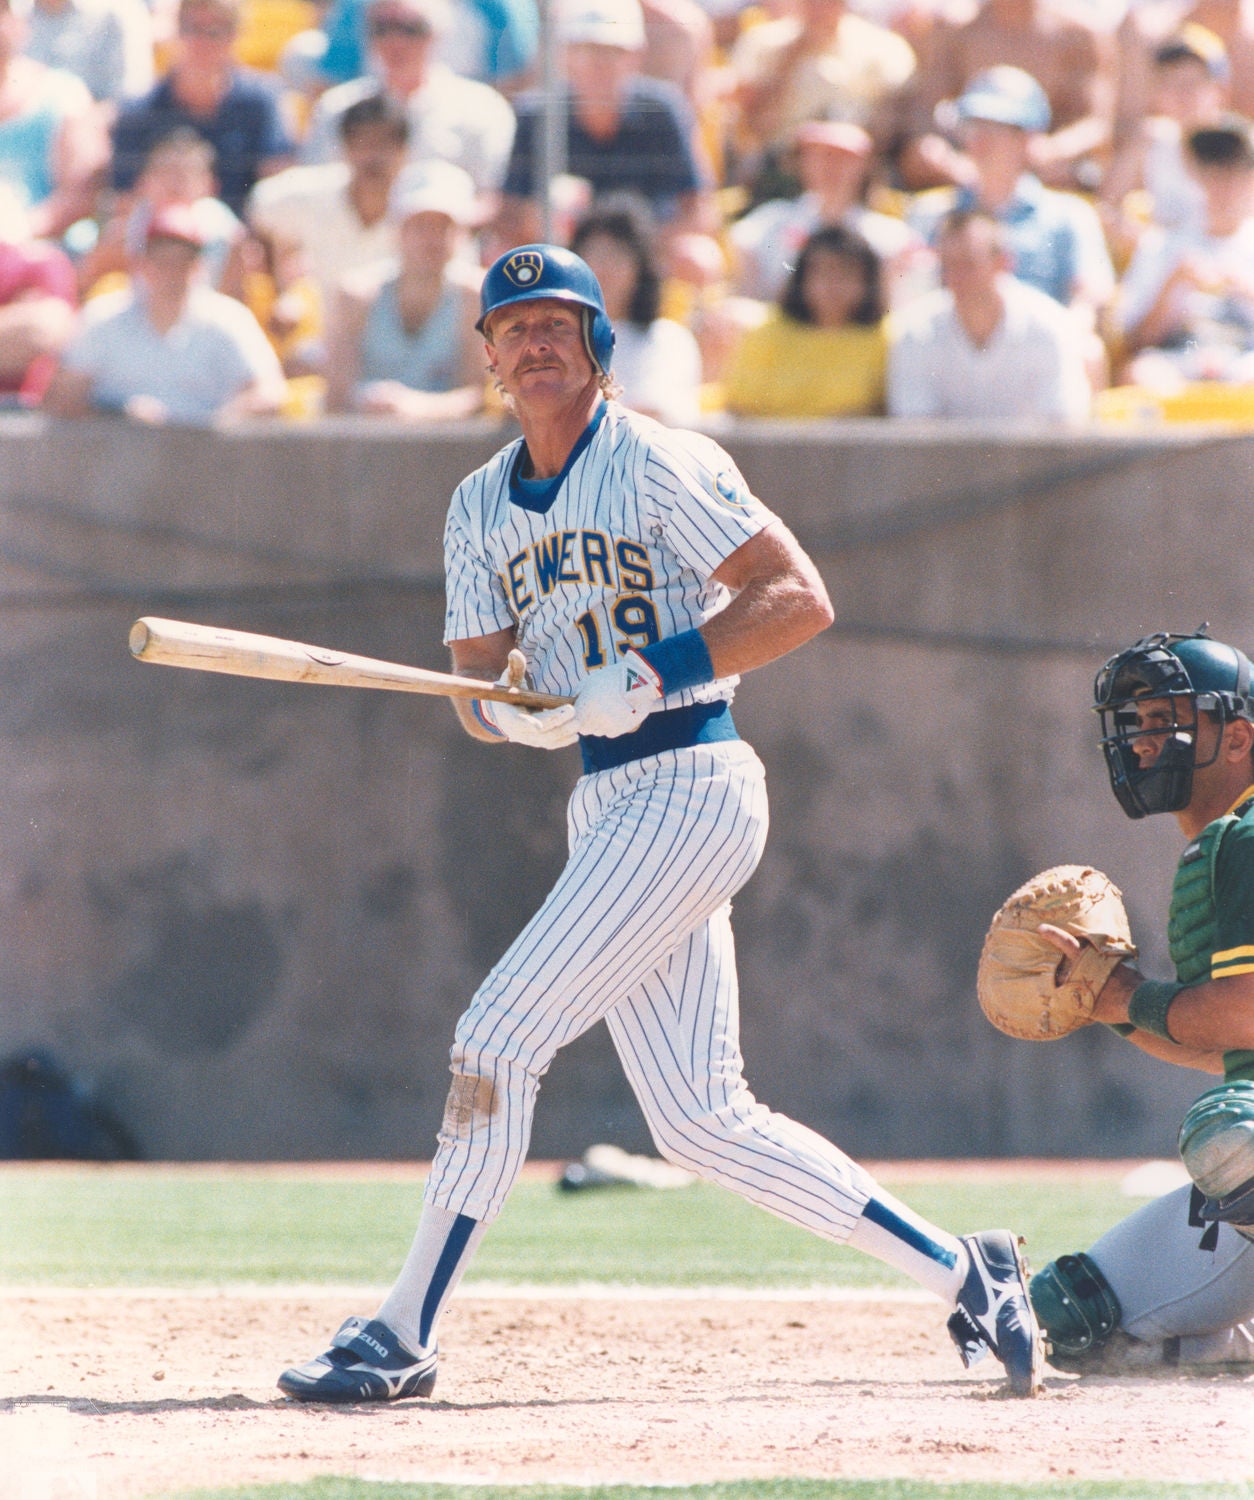 Robin Yount is the greatest player to ever put on a Brewers uniform